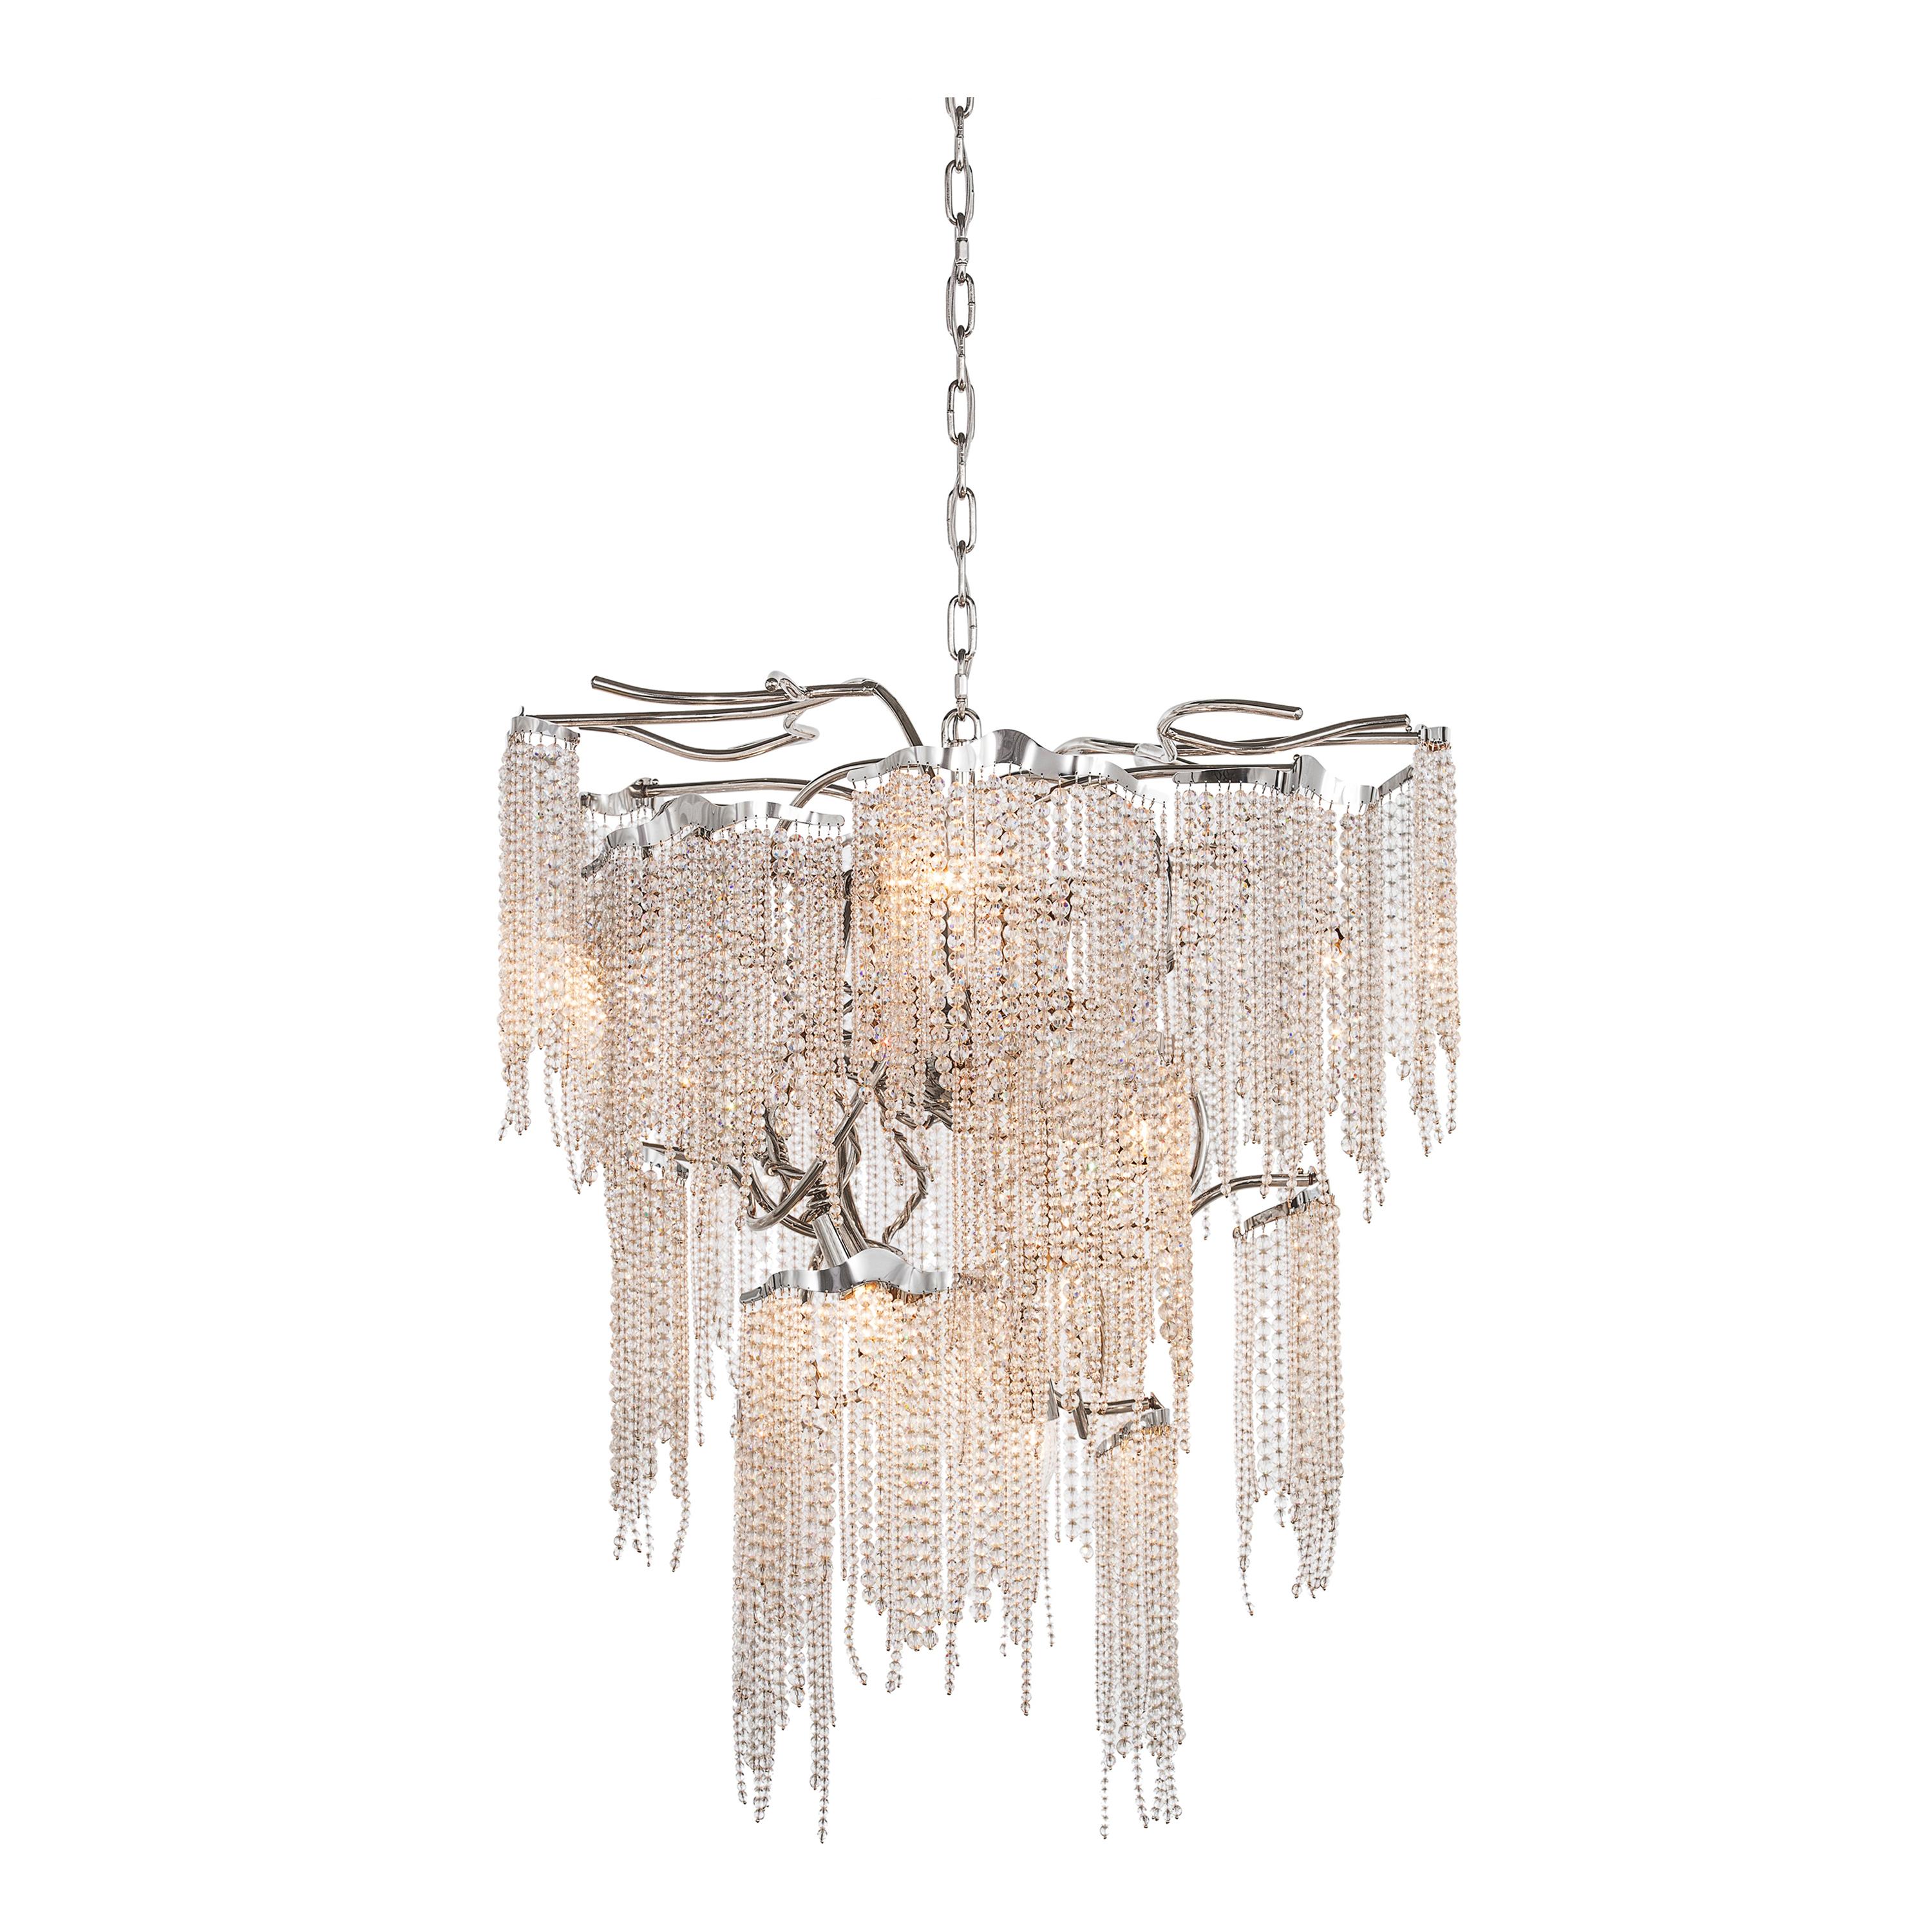 Modern Chandelier in a Conical Shape and in a Nickel Finish with Crystals